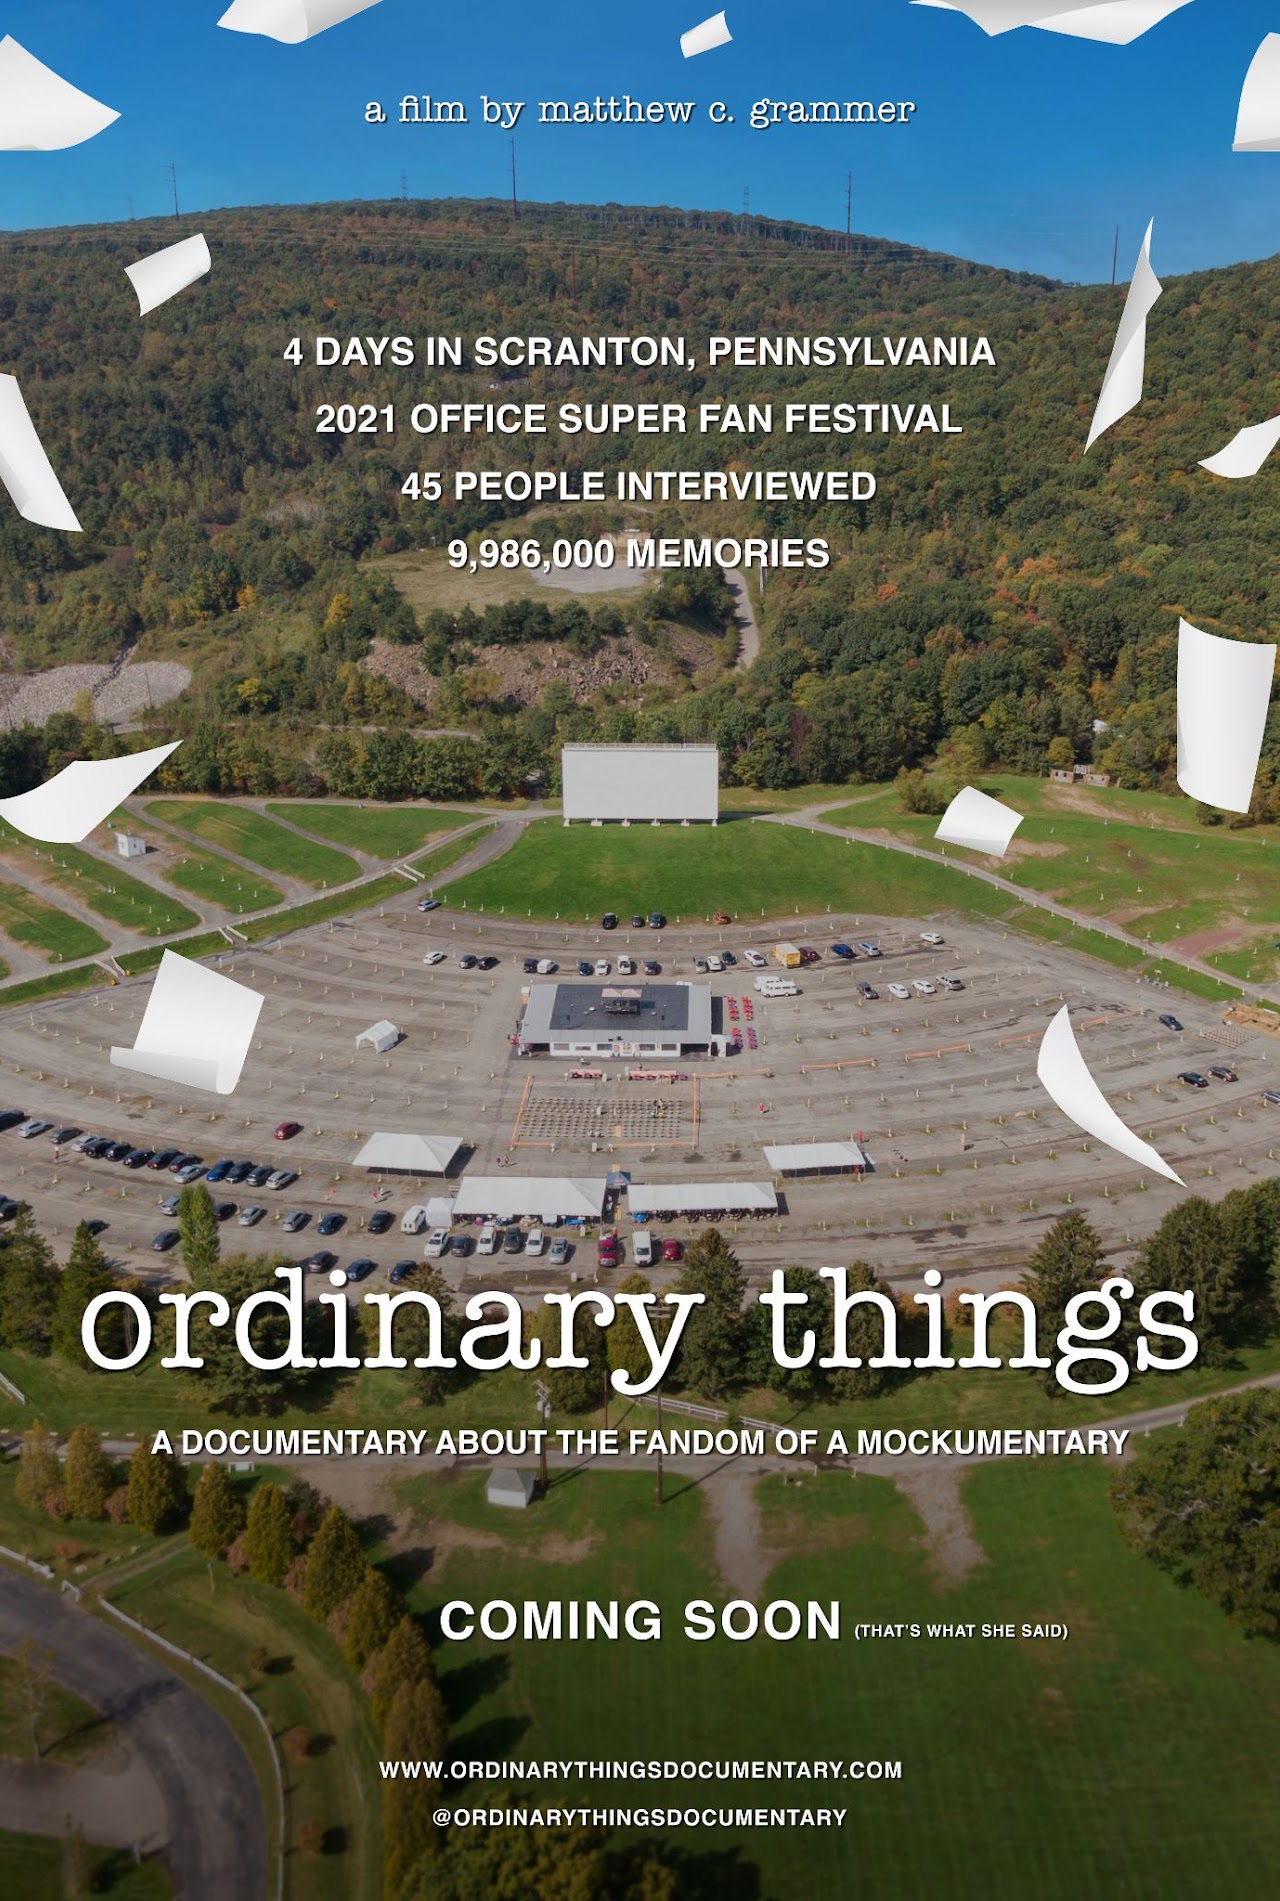 New Doc: ORDINARY THINGS